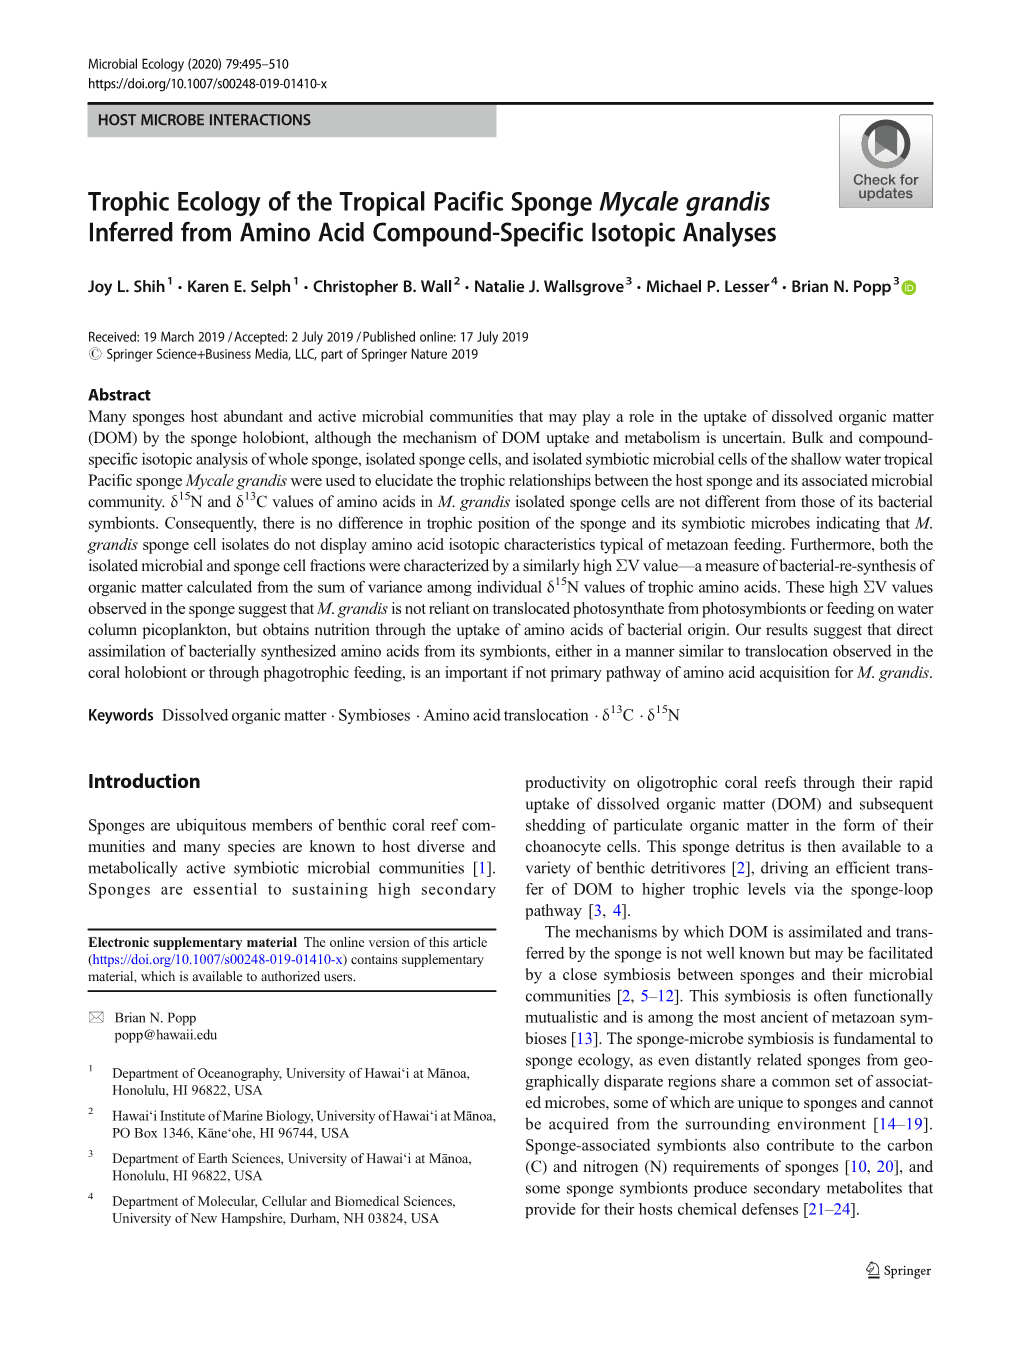 Trophic Ecology of the Tropical Pacific Sponge Mycale Grandis Inferred from Amino Acid Compound-Specific Isotopic Analyses